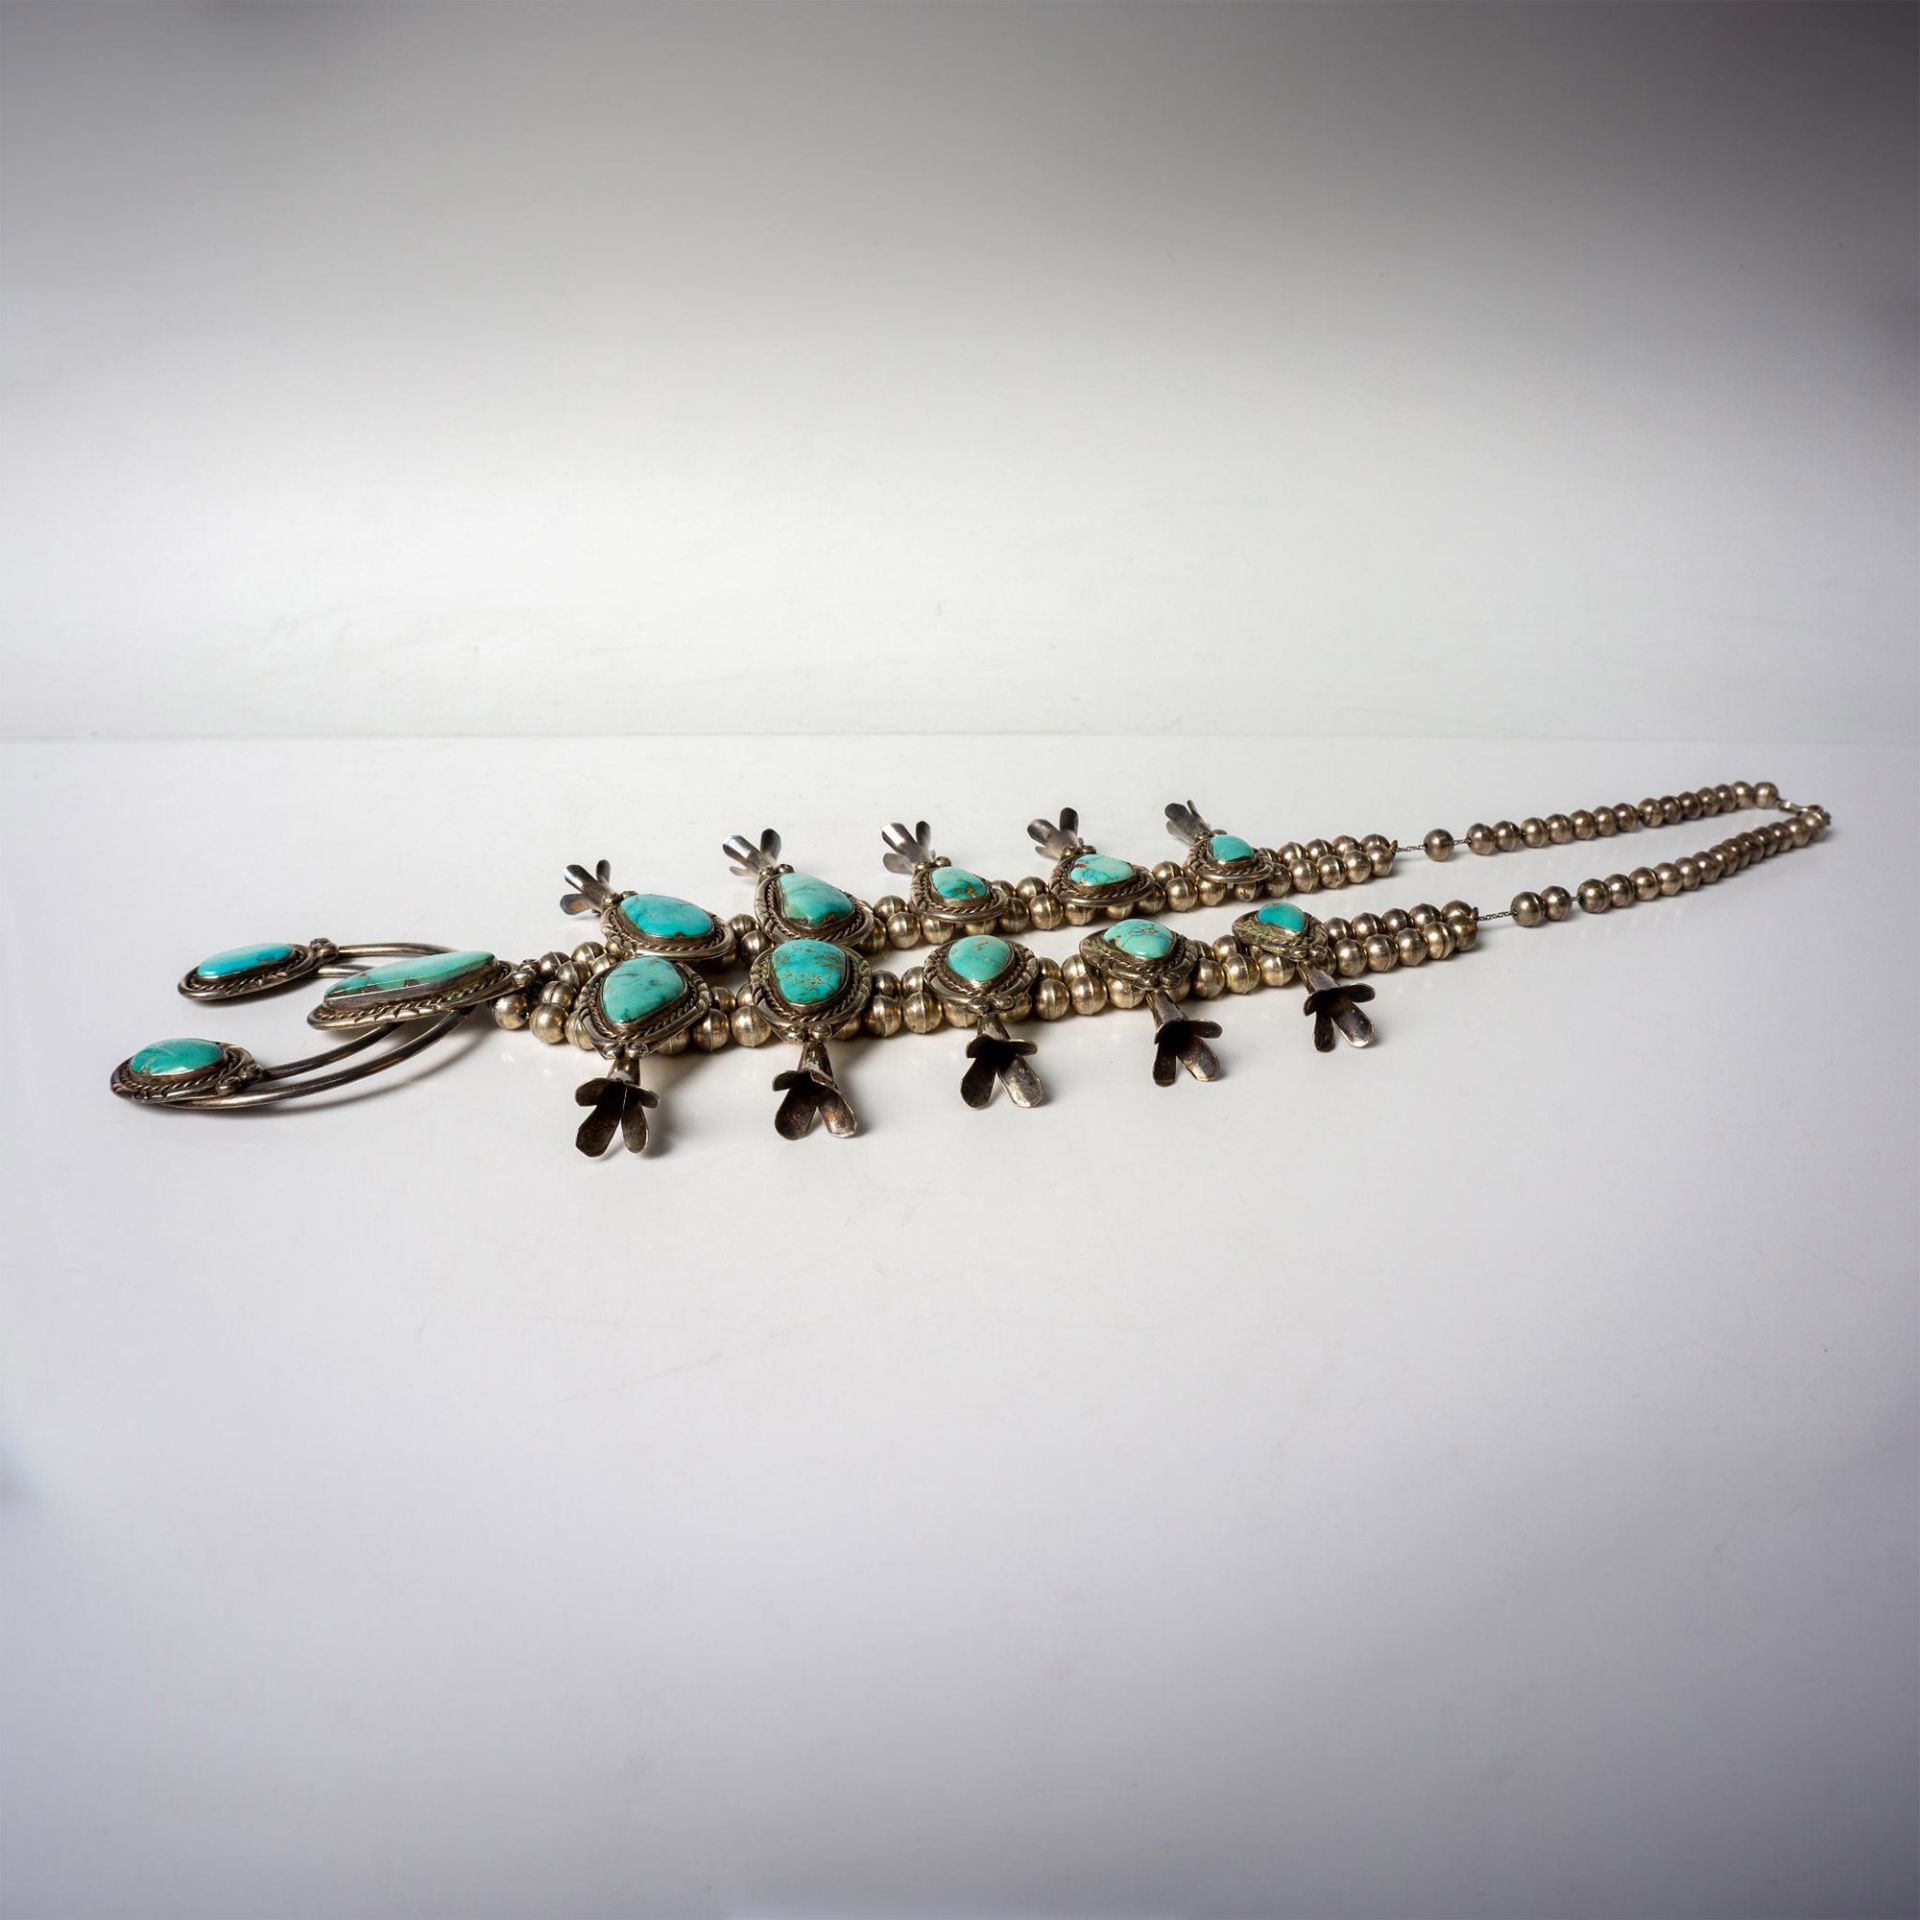 Navajo Sterling Squash Blossom Necklace - Image 4 of 5